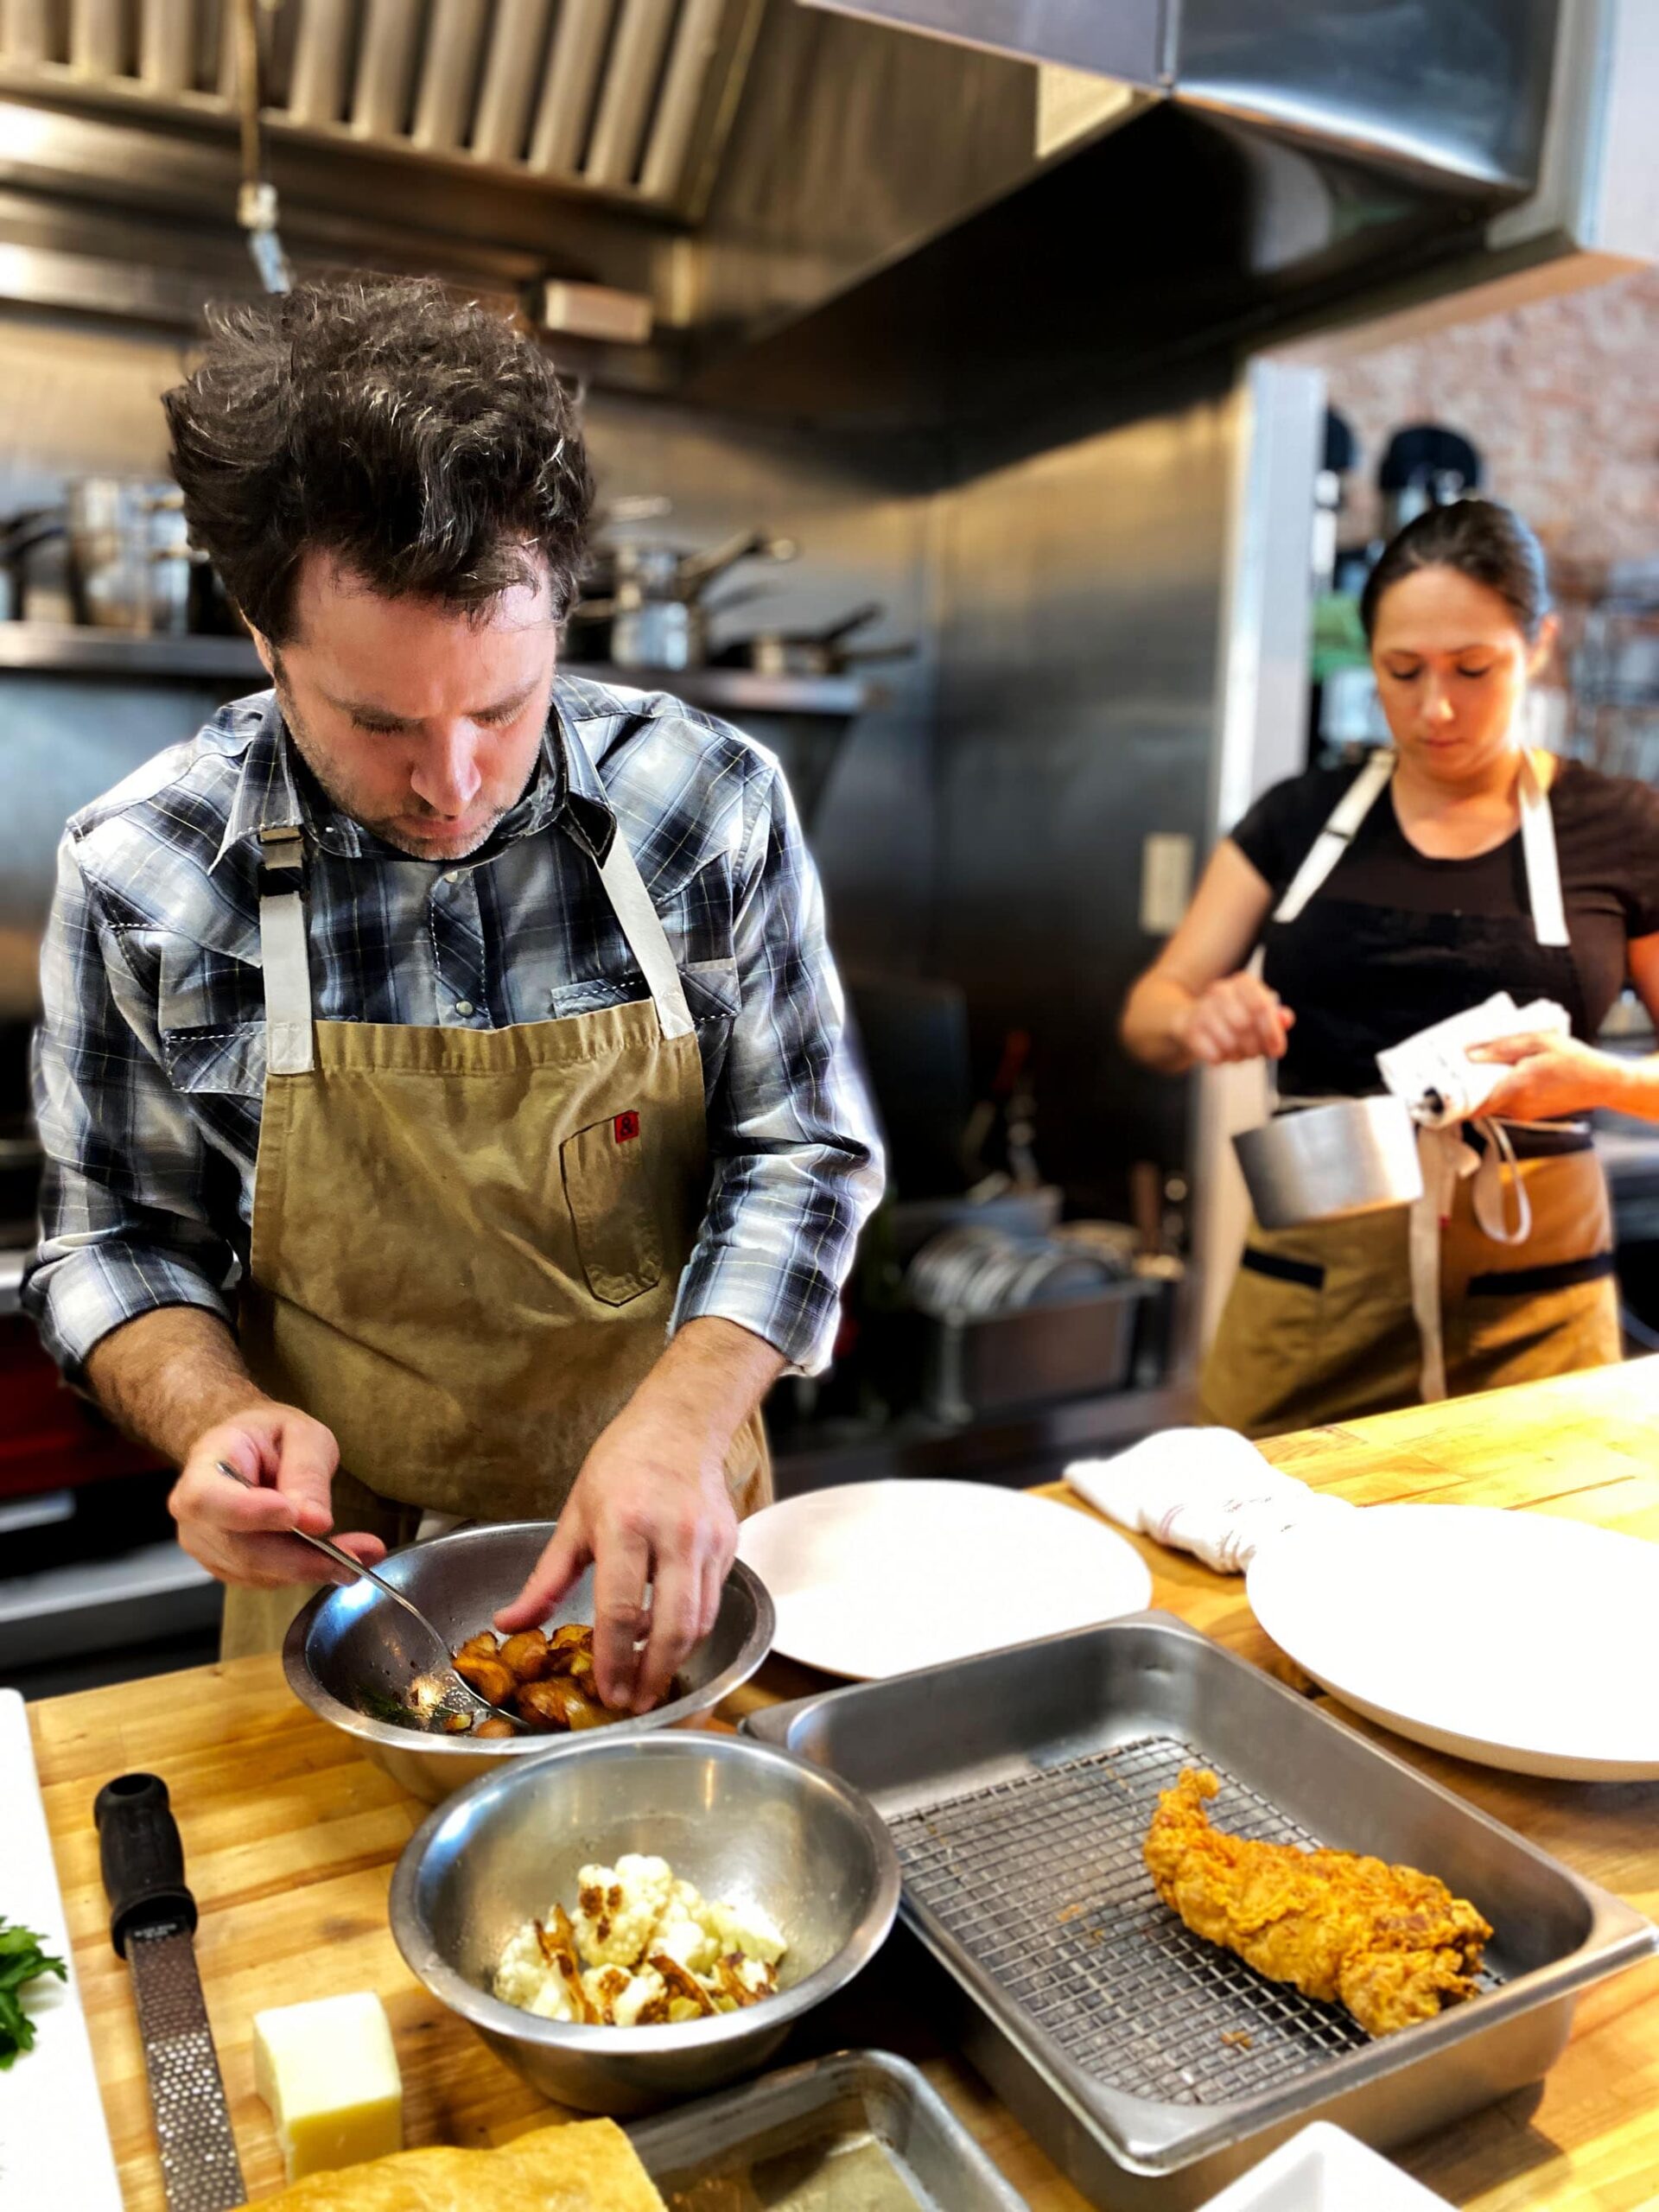 Chefs Nathan Lemley and Sarah Heard cooking together at Commerce Cafe in Lockhart, Texas.